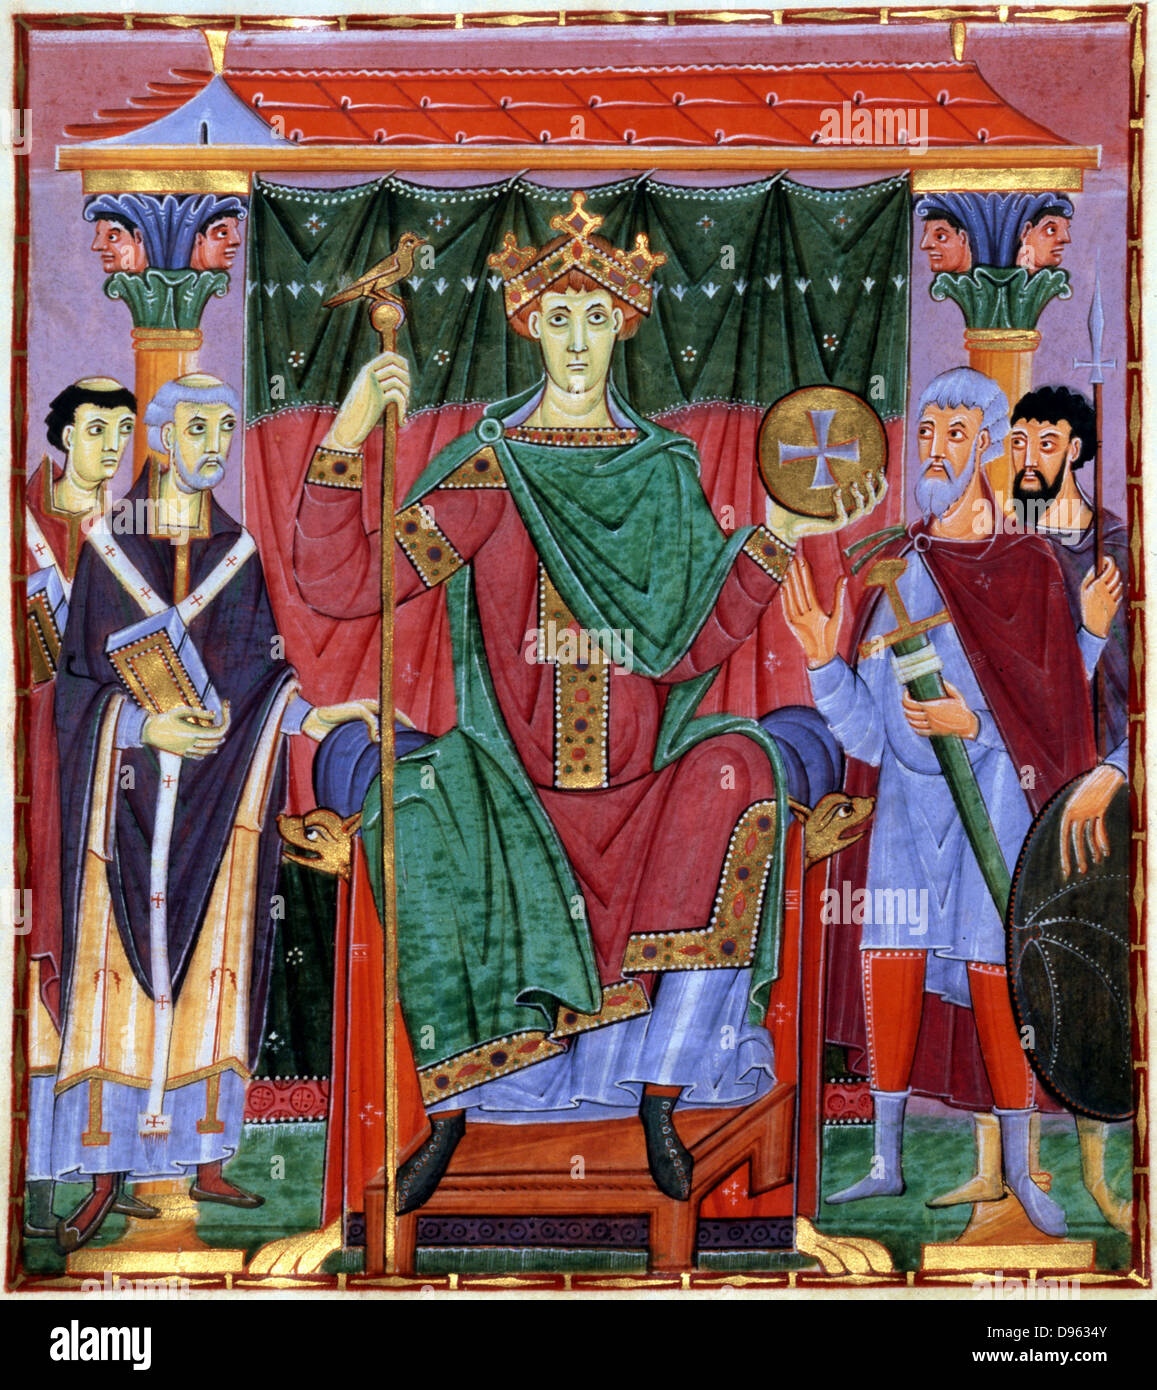 Coronation of Otto III, German king, c998. Otto (980-1002), wearing a crown and holding an orb and sceptre, is flanked on the left of picture by representatives of the church and on the right by secular advisors. The fourth ruler of the Saxon dynasty, Otto III (980-1002) was elected king in 983 when only 3 years old, after the death of his father, the Holy Roman Emperor Otto II. Otto reached his majority in 894, and was crowned Holy Roman Emperor in 996, by Pope Gregory V, the first German Pope, whose appointment Otto had engineered. Bayerische Staatbibliothek, Munich Stock Photo